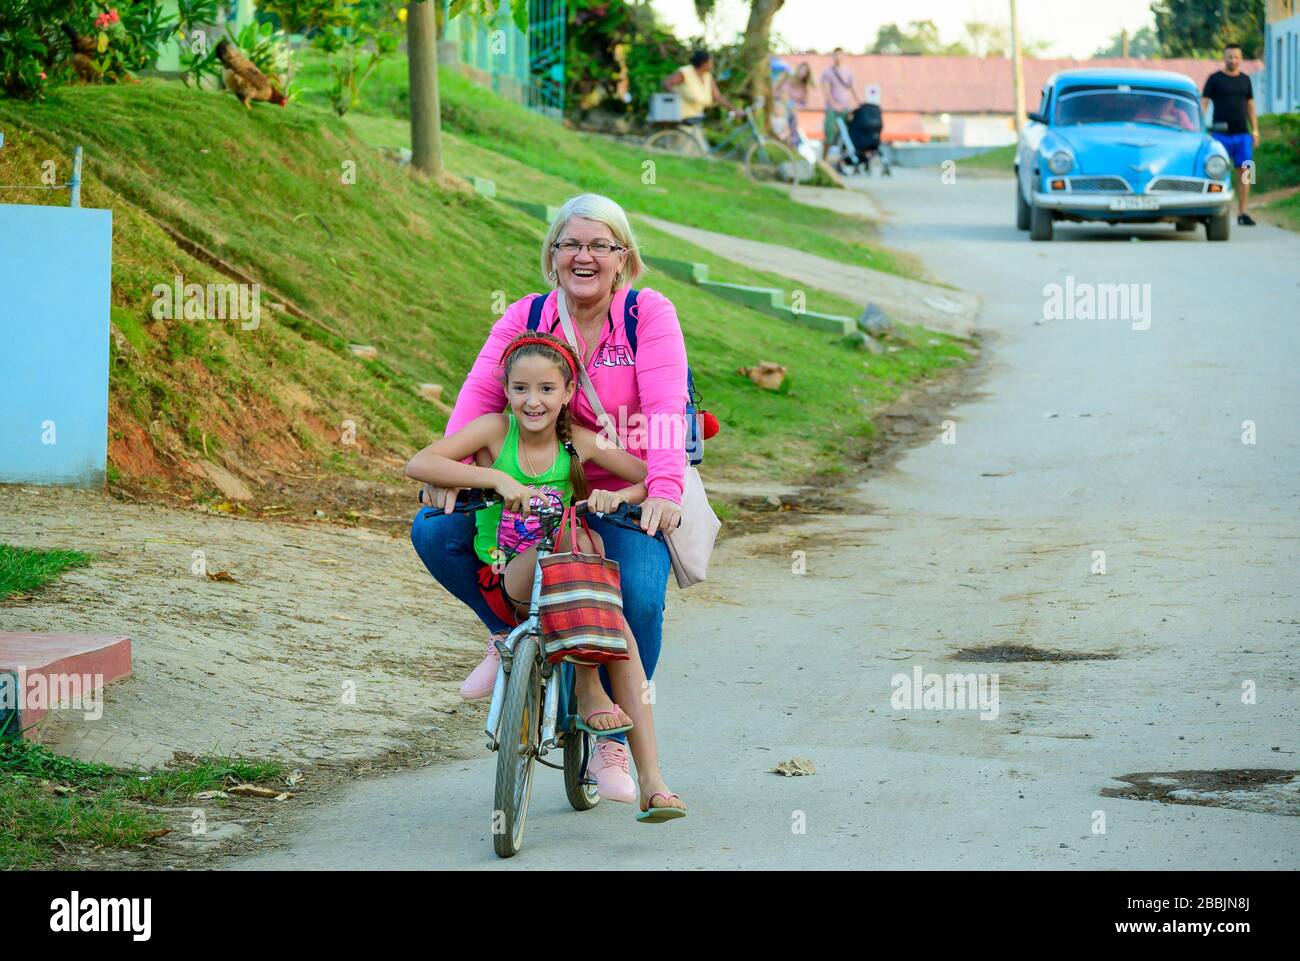 Woman and girl on bicycle, Vinales, Pinar del Rio Province, Cuba Stock Photo